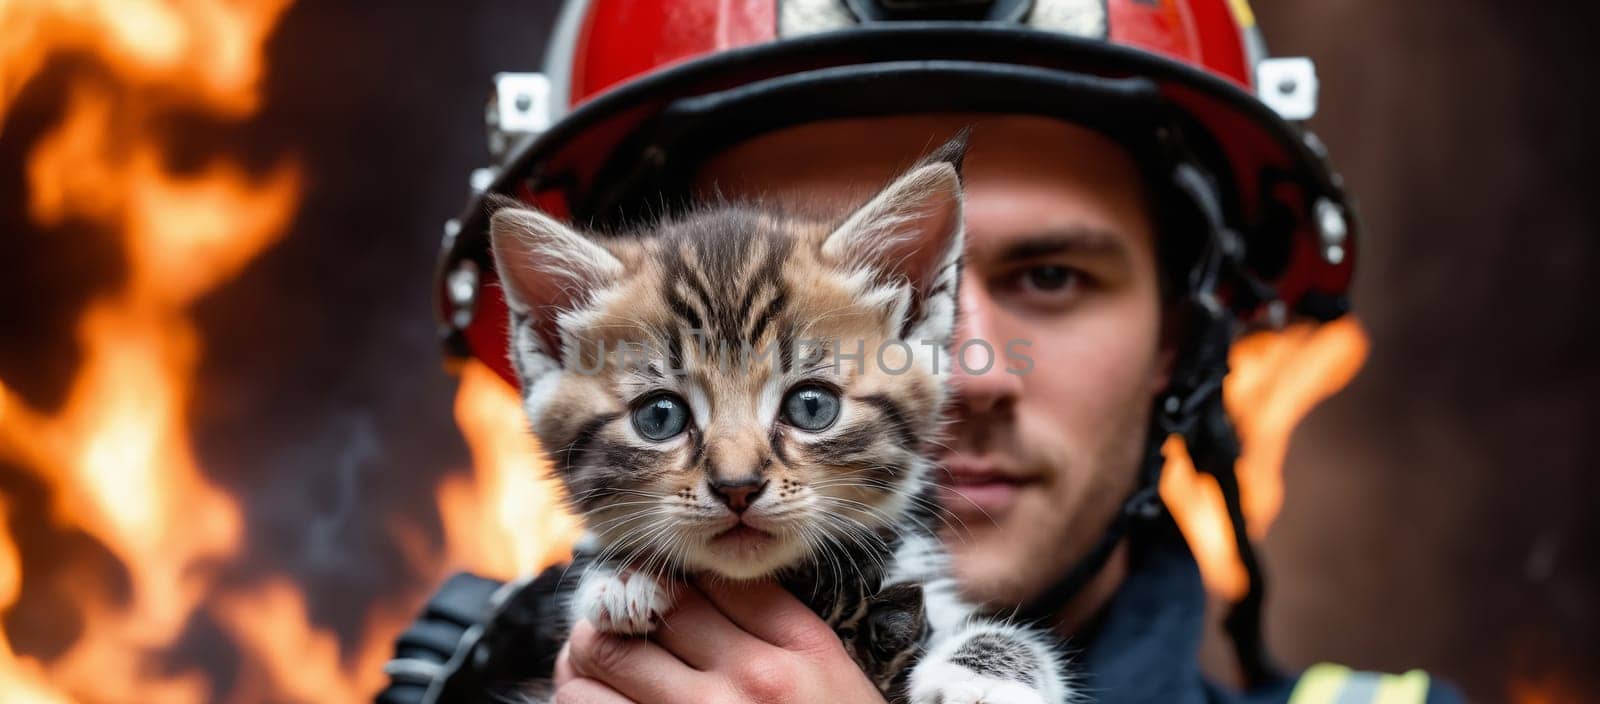 firefighter with a kitten in his arms on the background of fire by Andre1ns